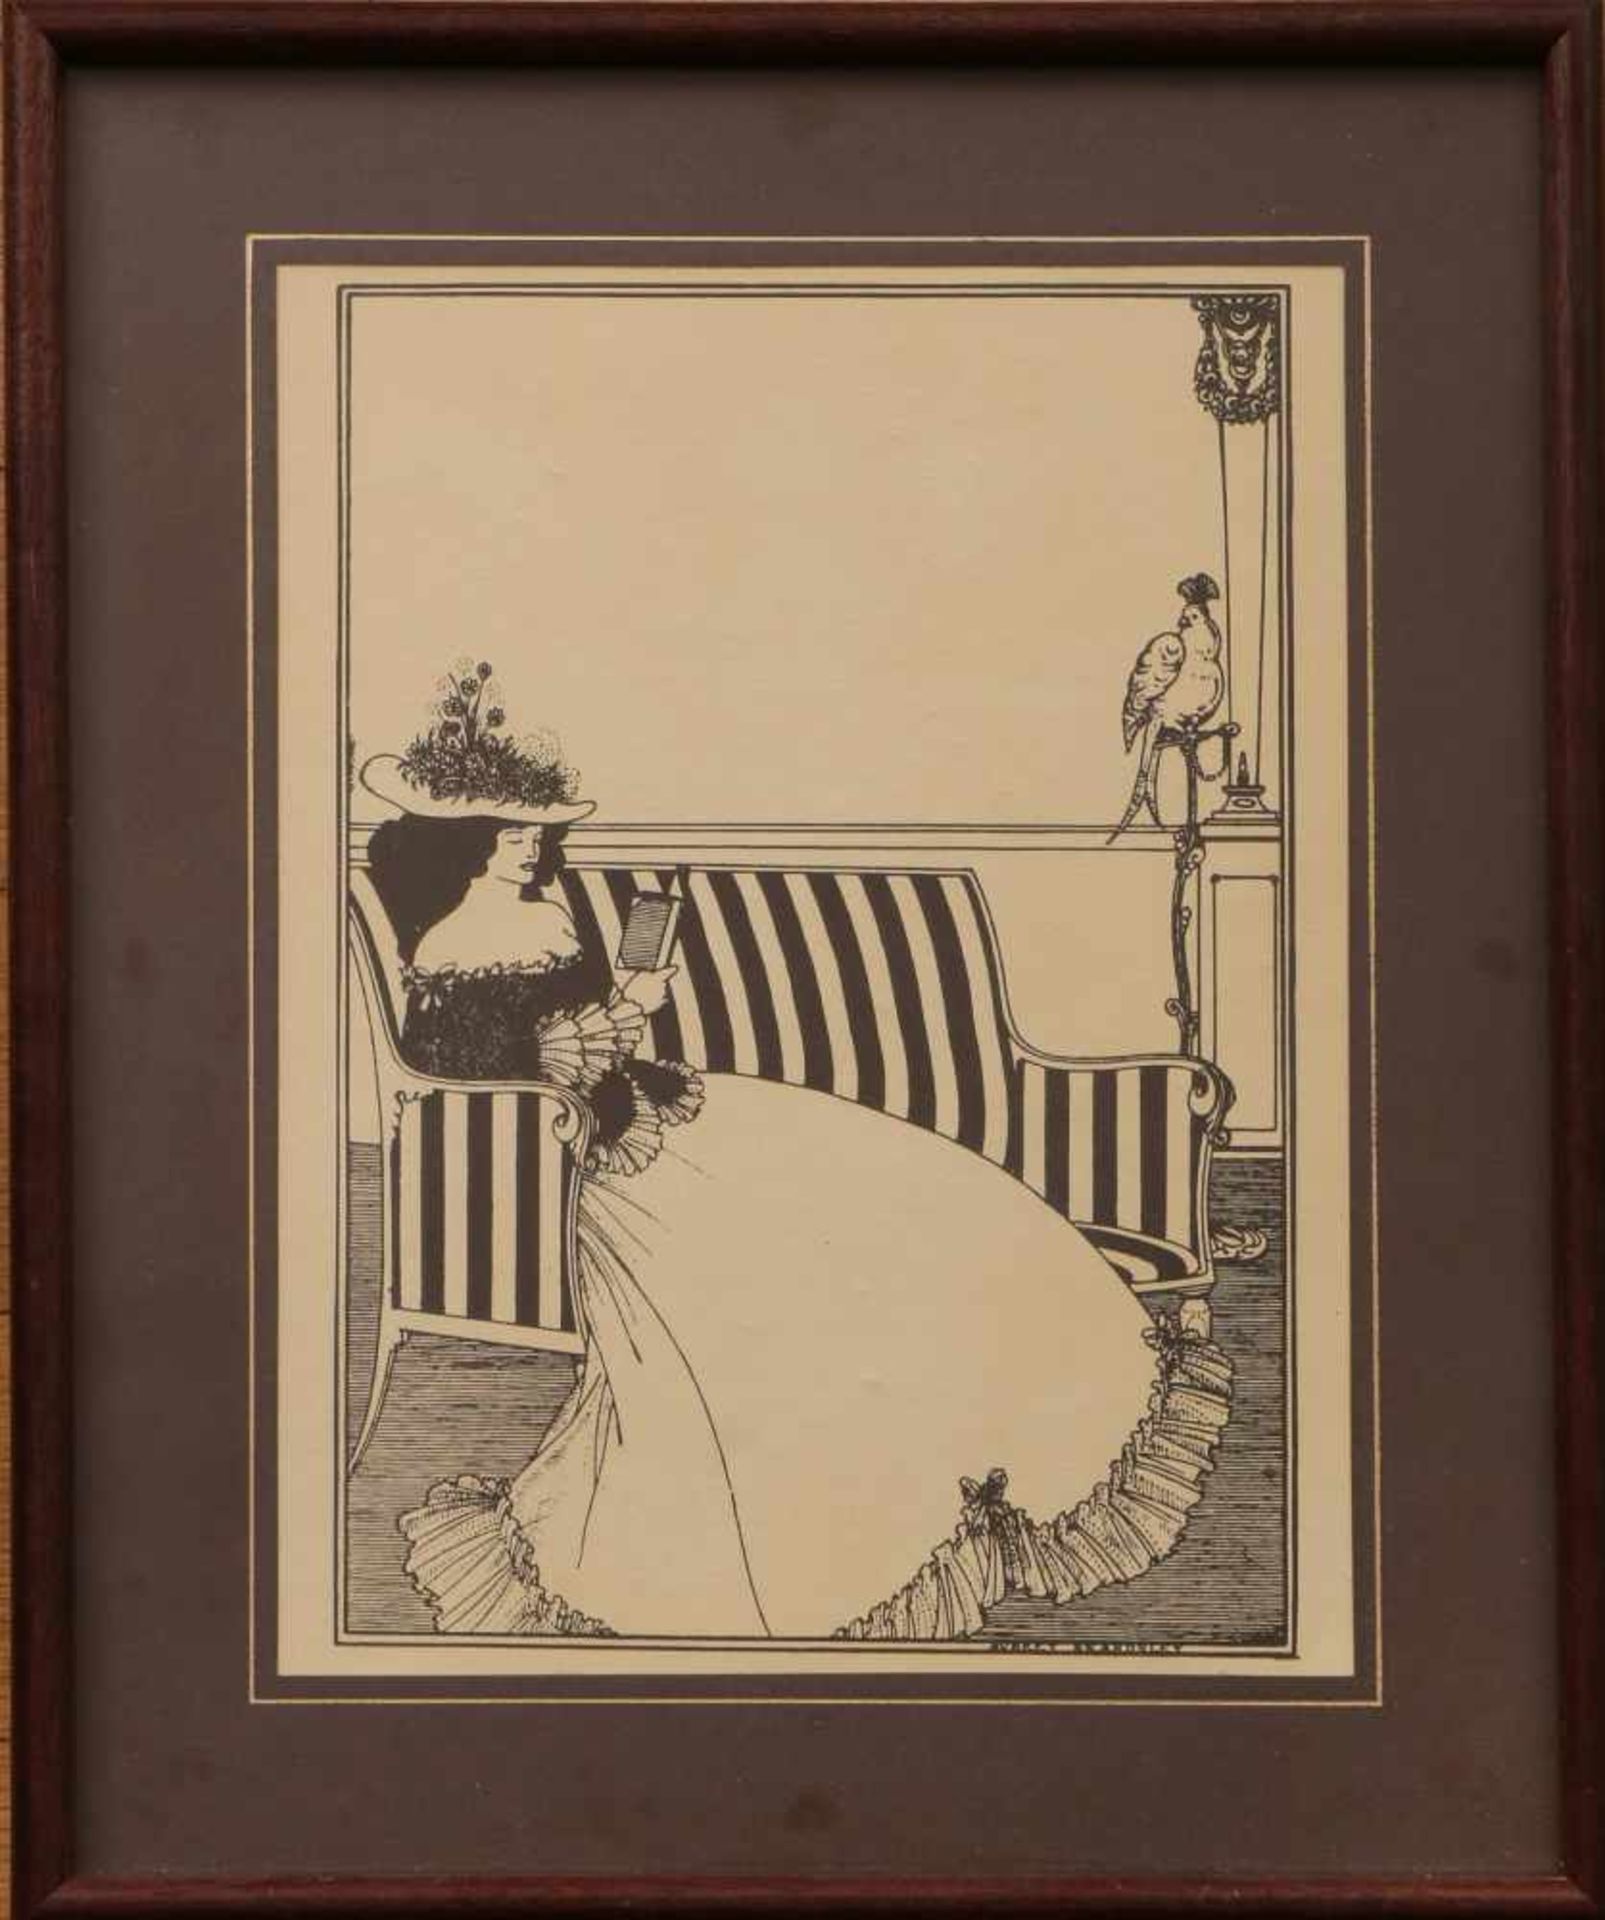 AUBREY BEARDSLEY (1872 Brighton - 1898 Menton) Lithographie, ¨Design for the front wrapper of